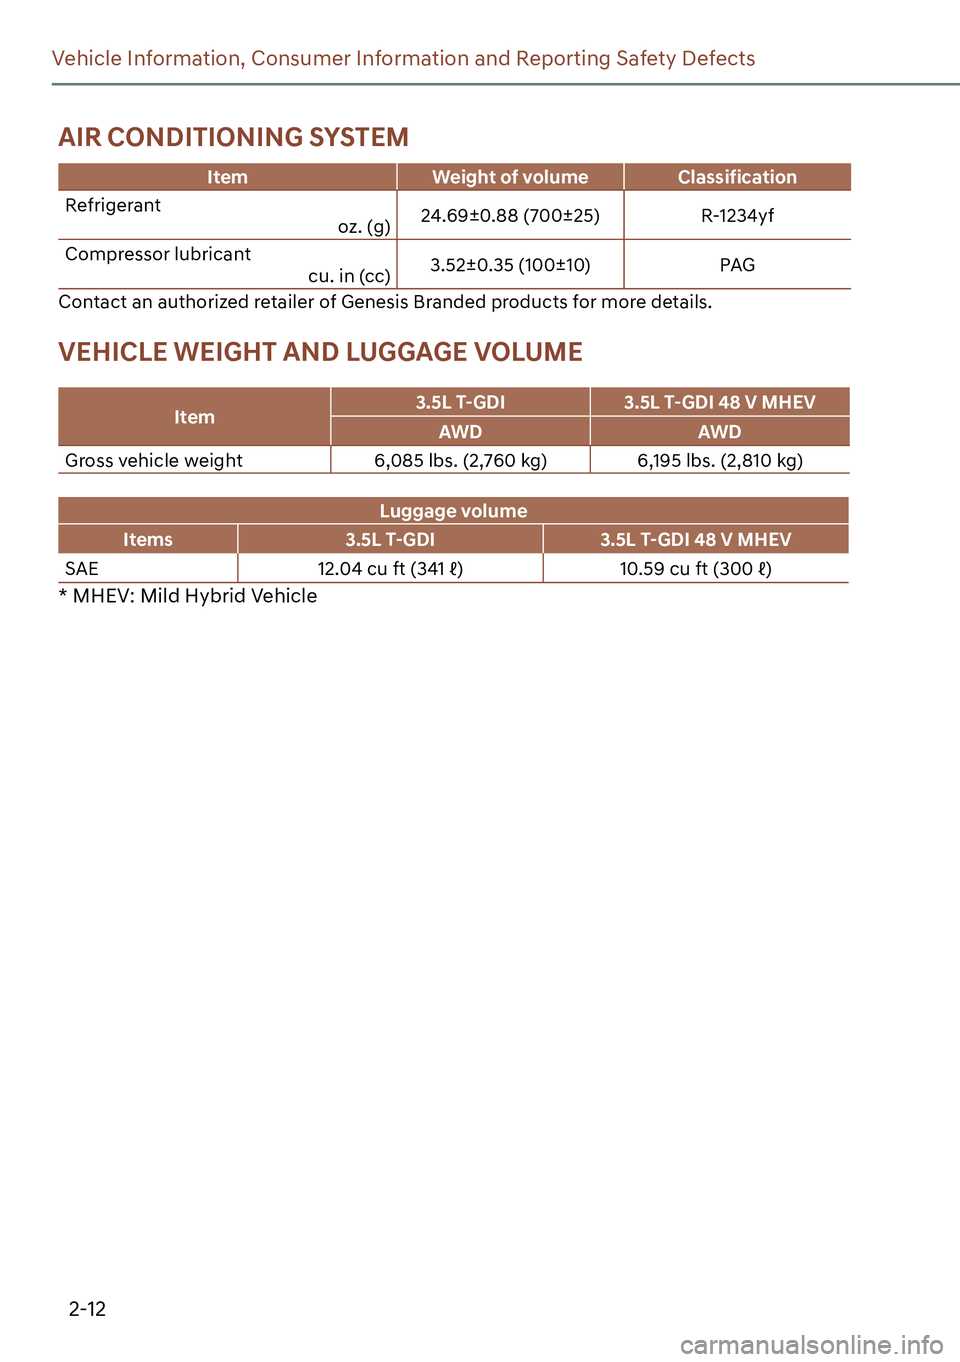 GENESIS G90 2023  Owners Manual 2-12
Vehicle Information, Consumer Information and Reporting Safety Defects
Item Weight of volume Classification
Refrigerant
oz. (g)24.69±0.88 (700±25) R-1234yf
Compressor lubricant
cu. in (cc)3.52�